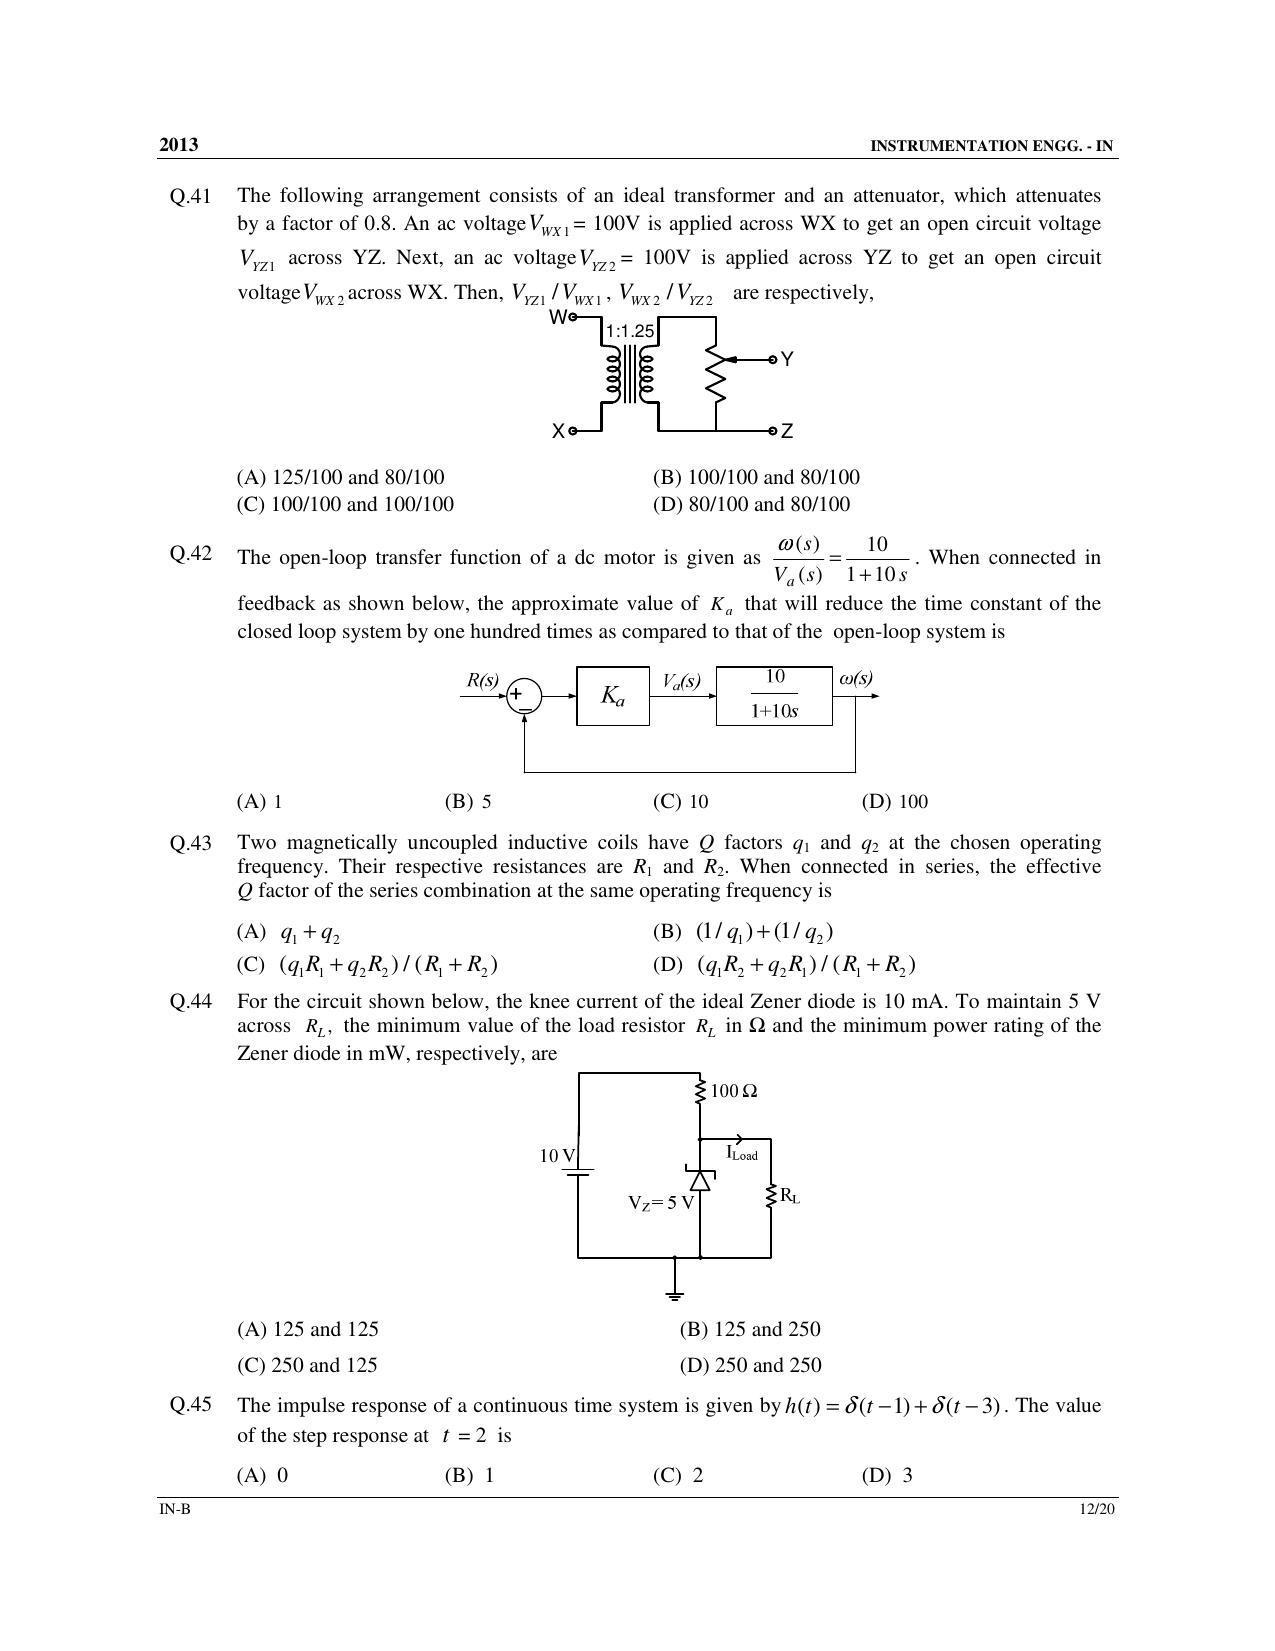 GATE 2013 Instrumentation Engineering (IN) Question Paper with Answer Key - Page 30